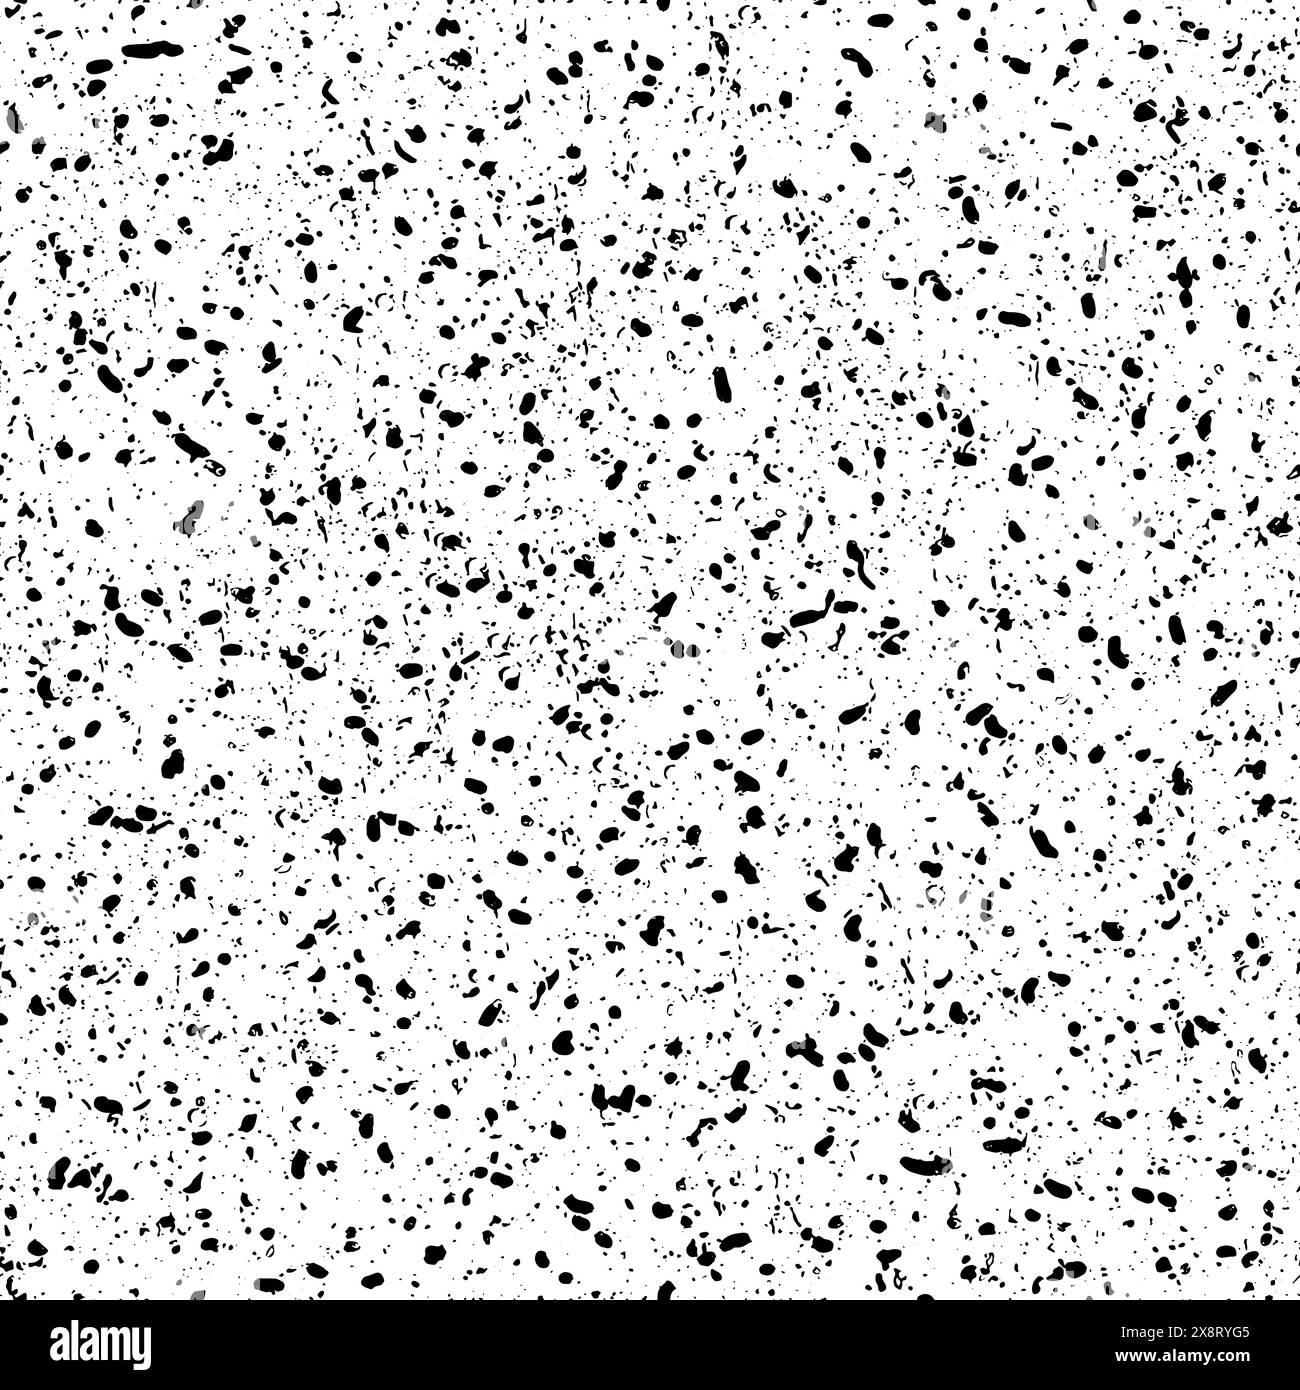 Small ink splatters on white background. Vector seamless pattern with black blotches on rough worn surface. Stock Vector